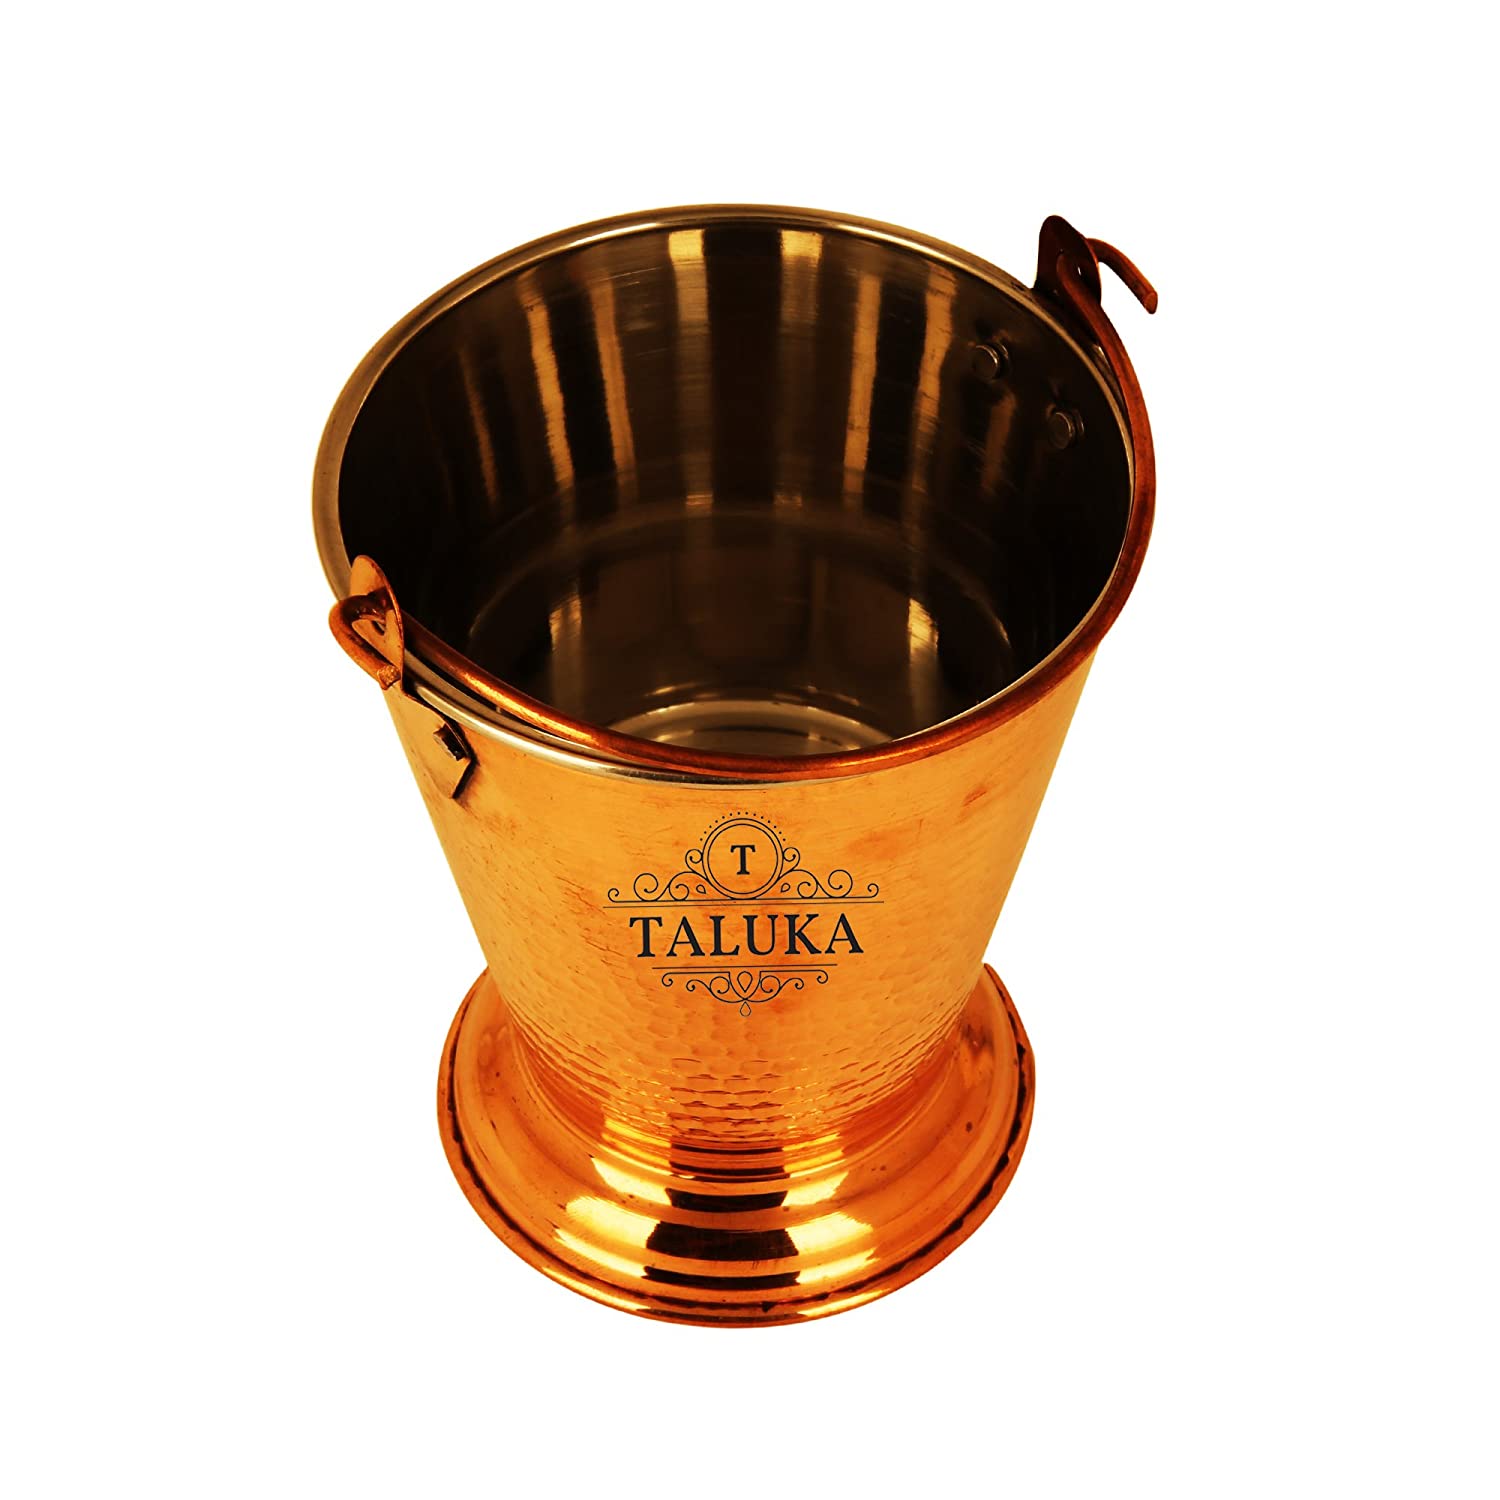 Taluka Pure Copper Stainless Steel Copper Family Set of 4 Content :- 1 Copper Bucket 1 Copper Steel Kadhai 1 Copper Serving Handi 1 Copper Serving Spoon Pot 1 L  (Copper, Stainless Steel)